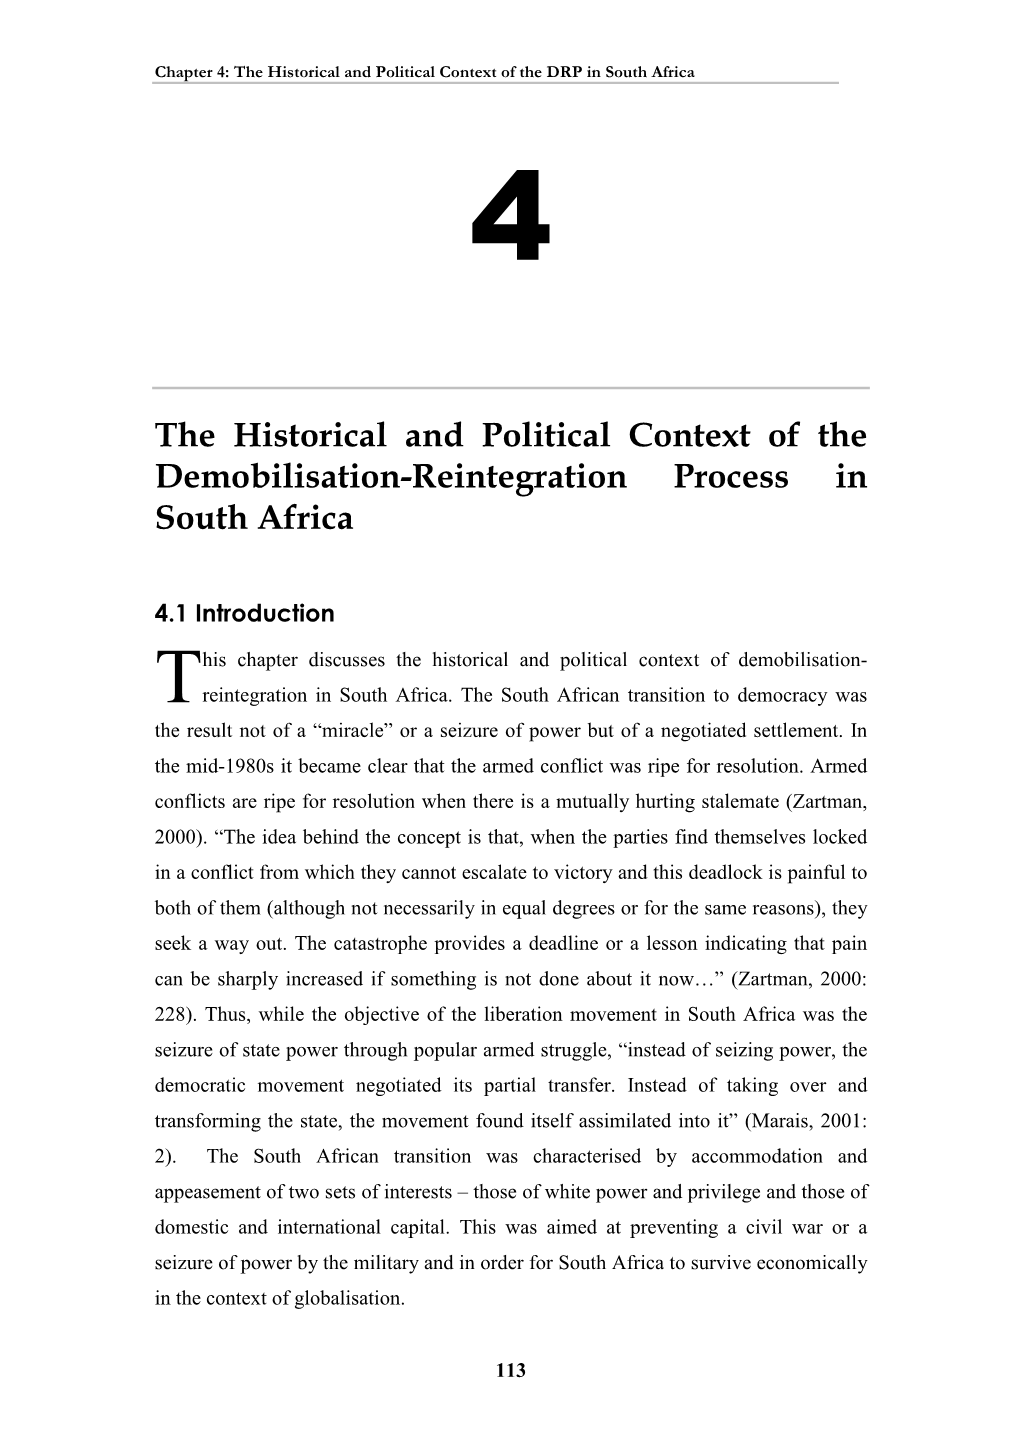 The Historical and Political Context of the Demobilisation-Reintegration Process in South Africa